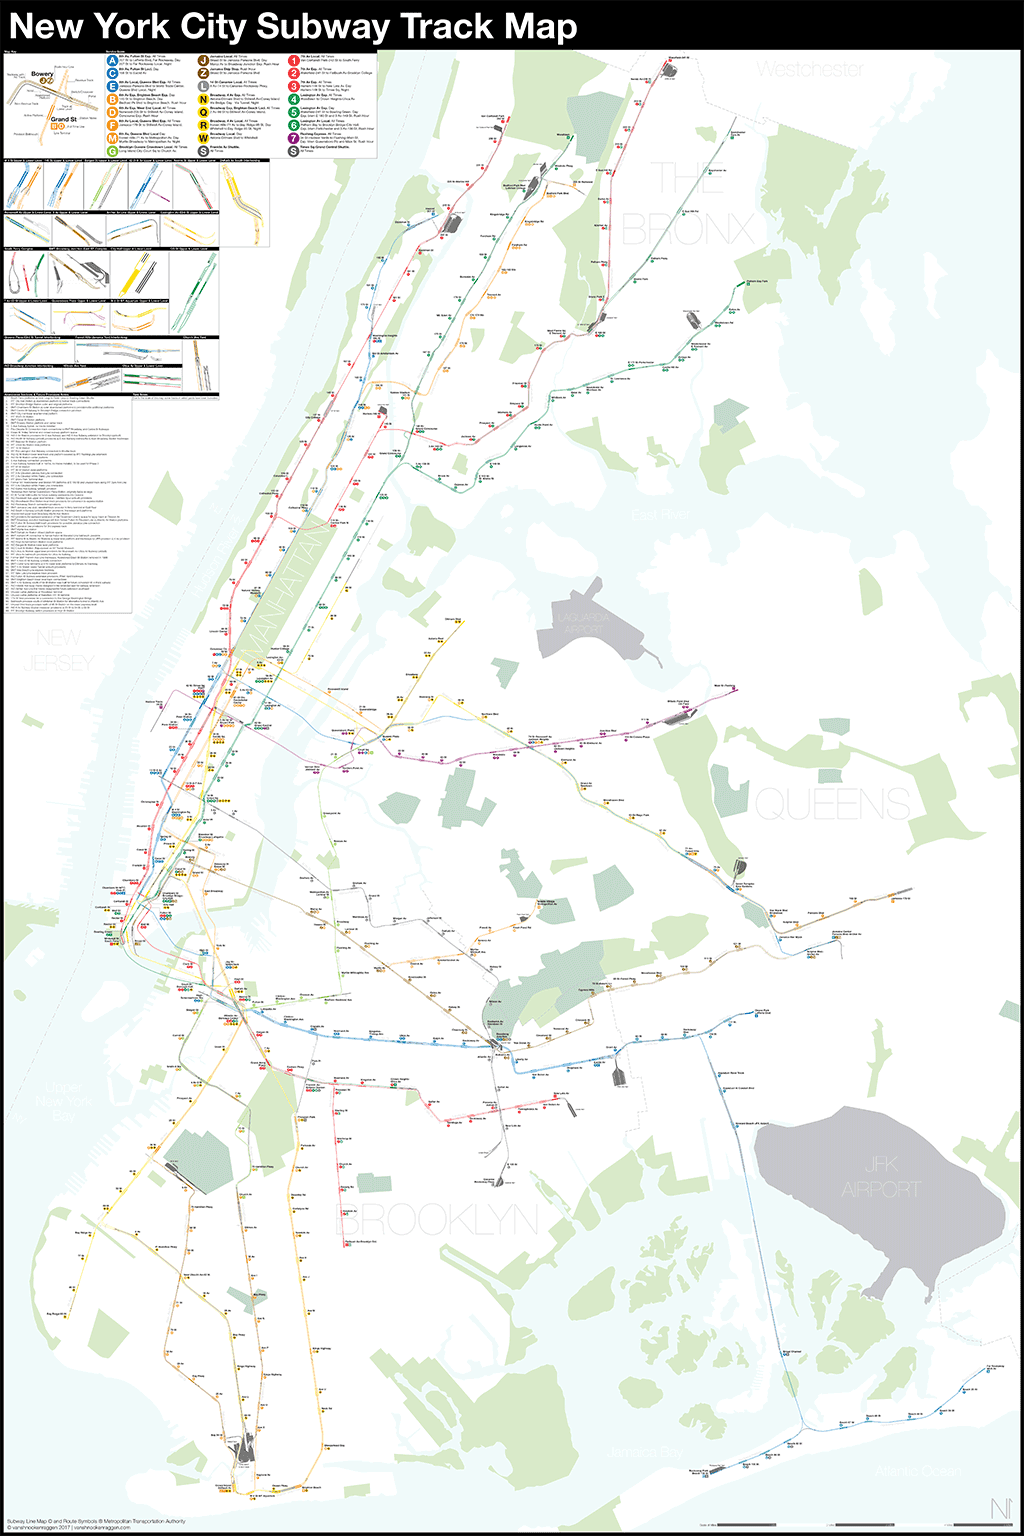 Nyc Subway Track Map A Complete and Geographically Accurate NYC Subway Track Map 